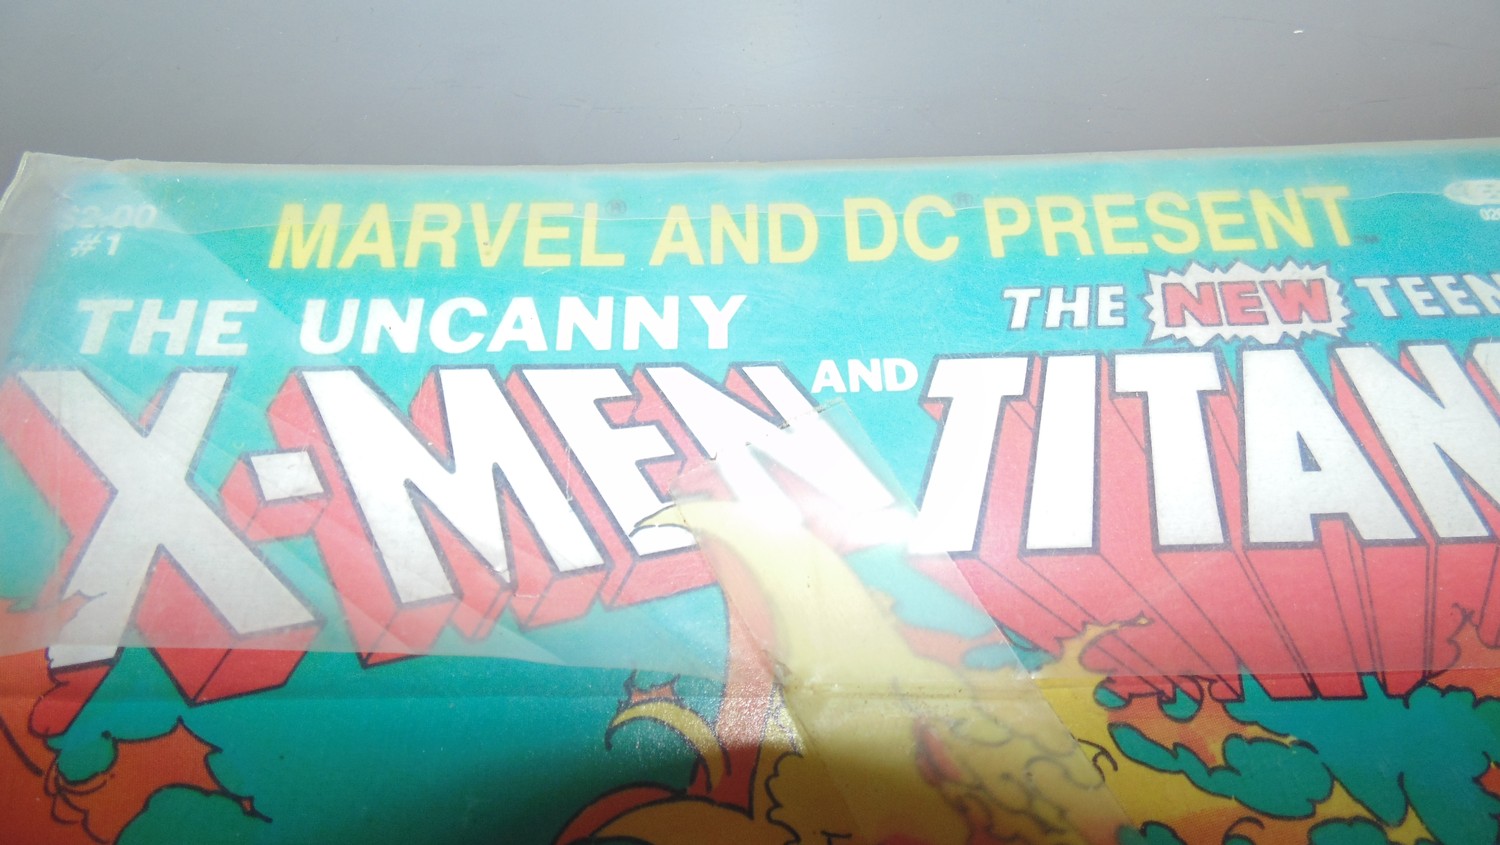 X-Men and the Titans, First edition comic. - Image 3 of 3